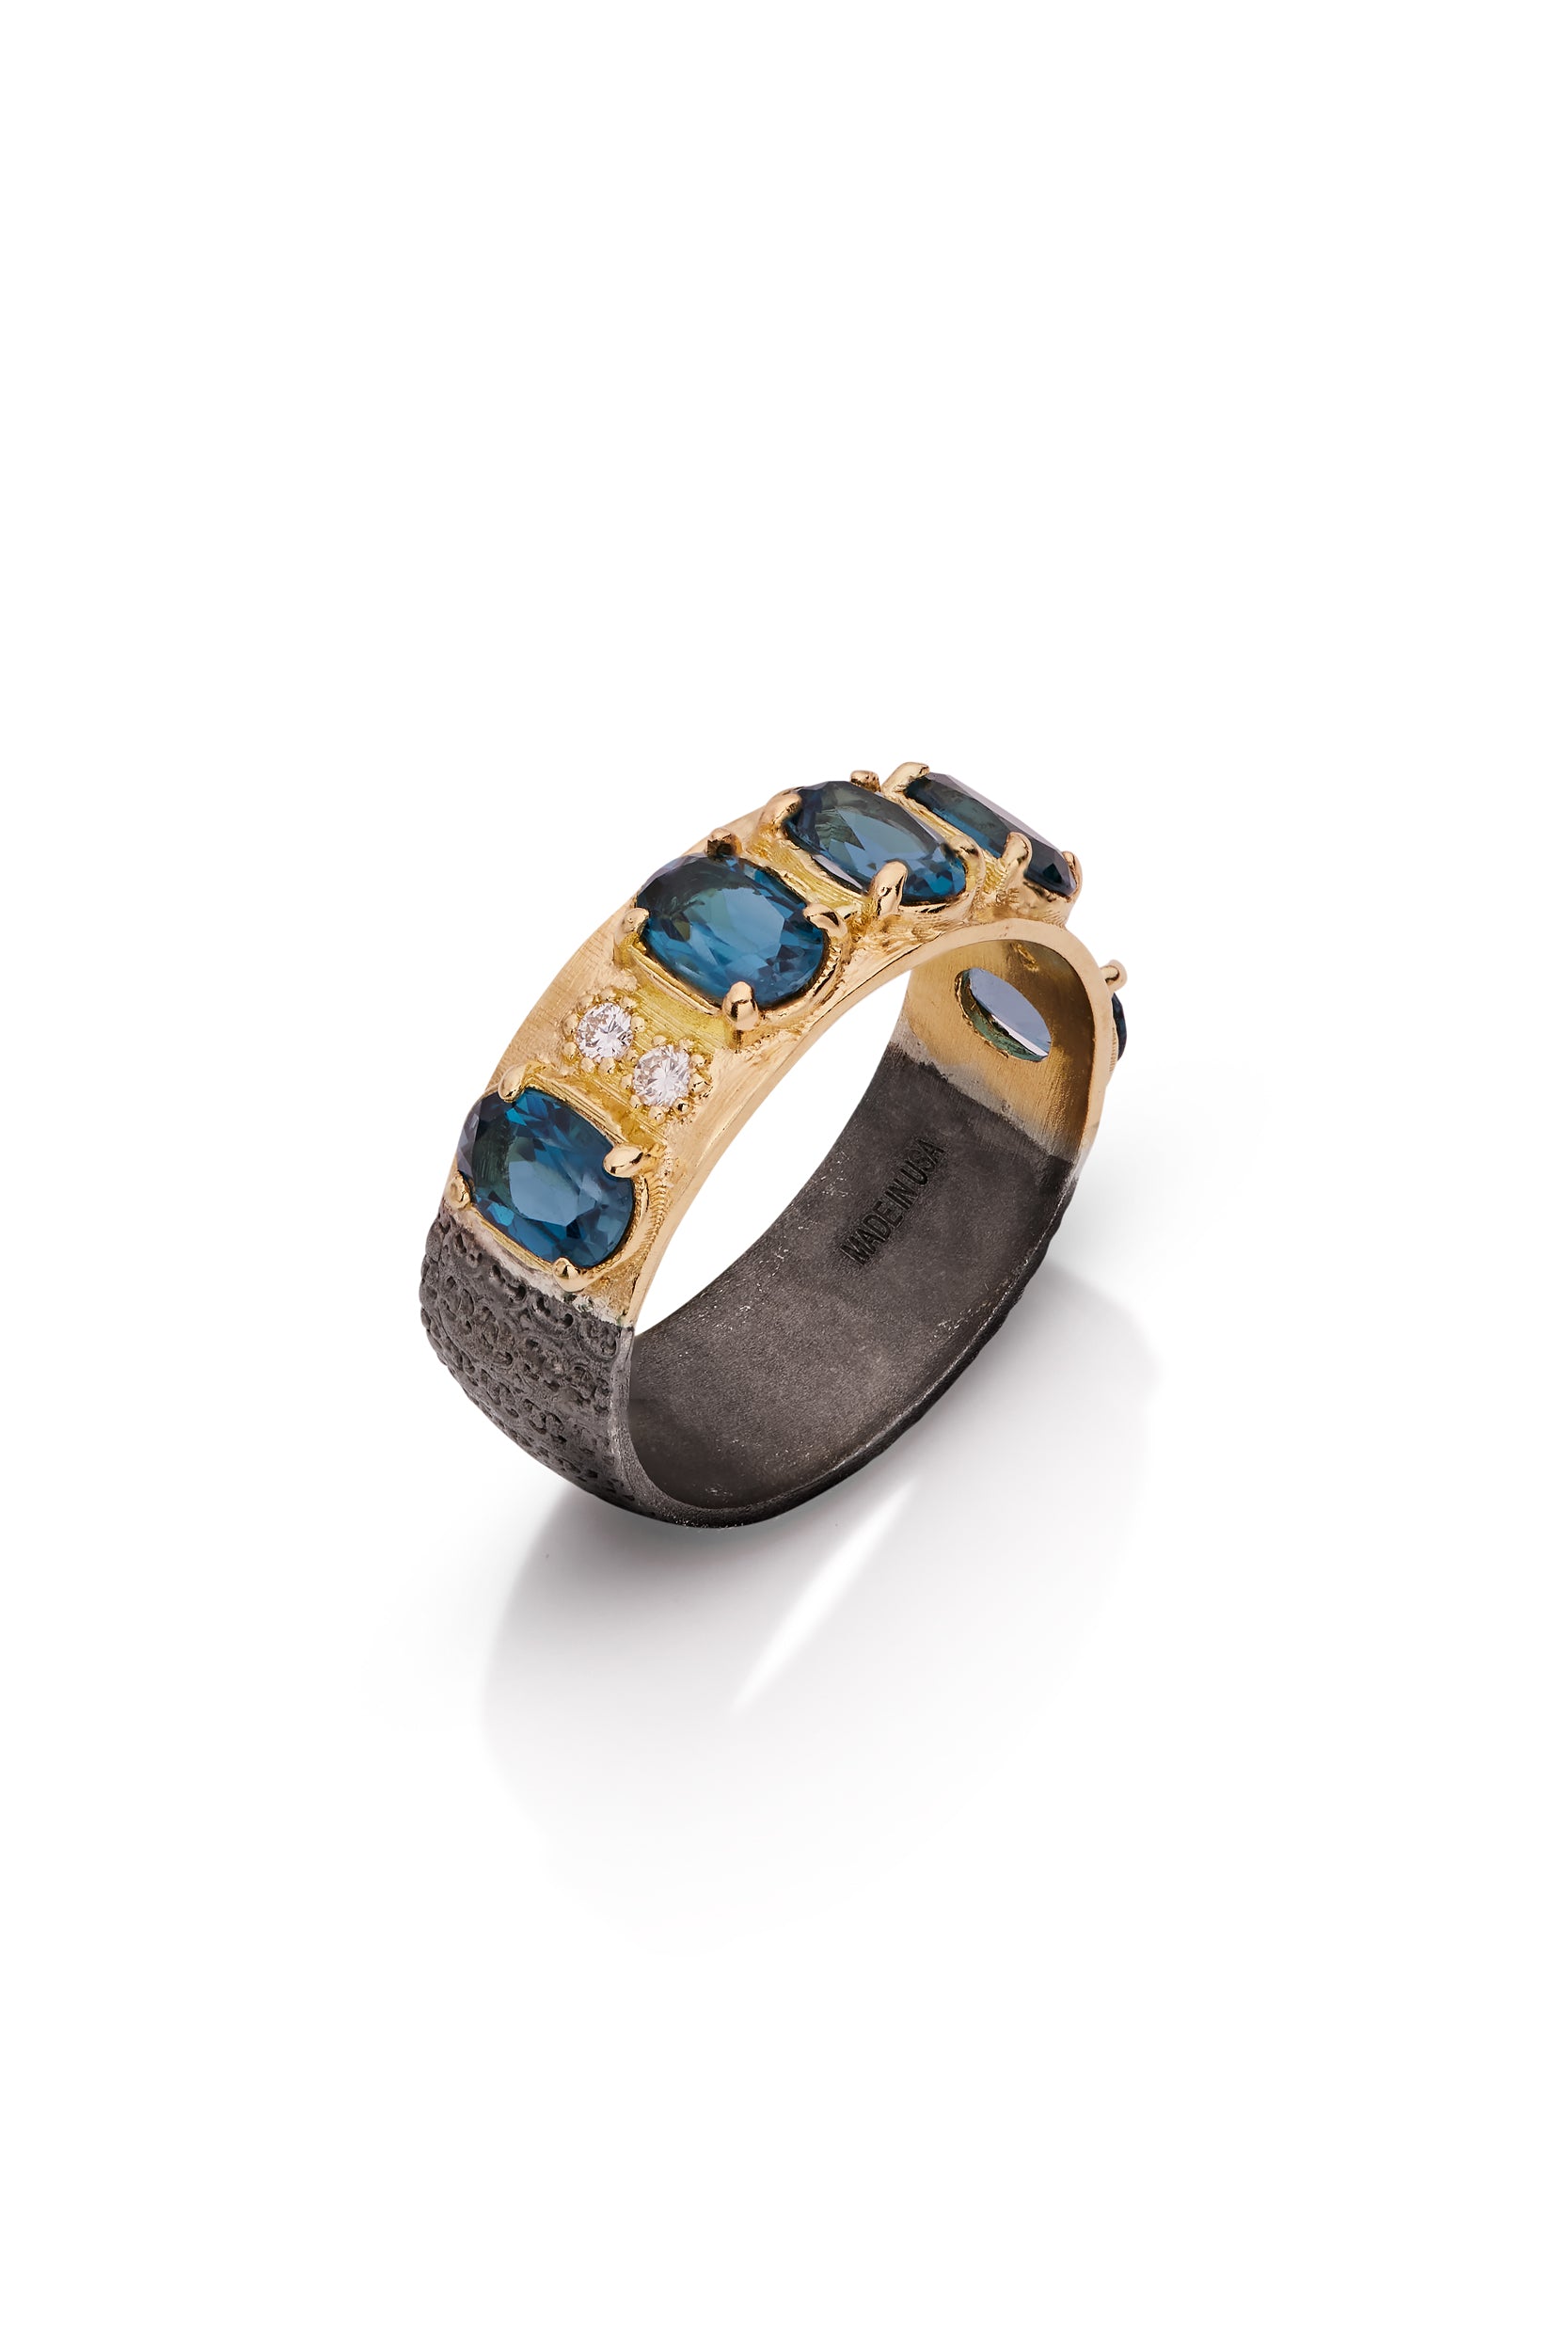 14K Yellow Gold Ring with Oval London Blue Top